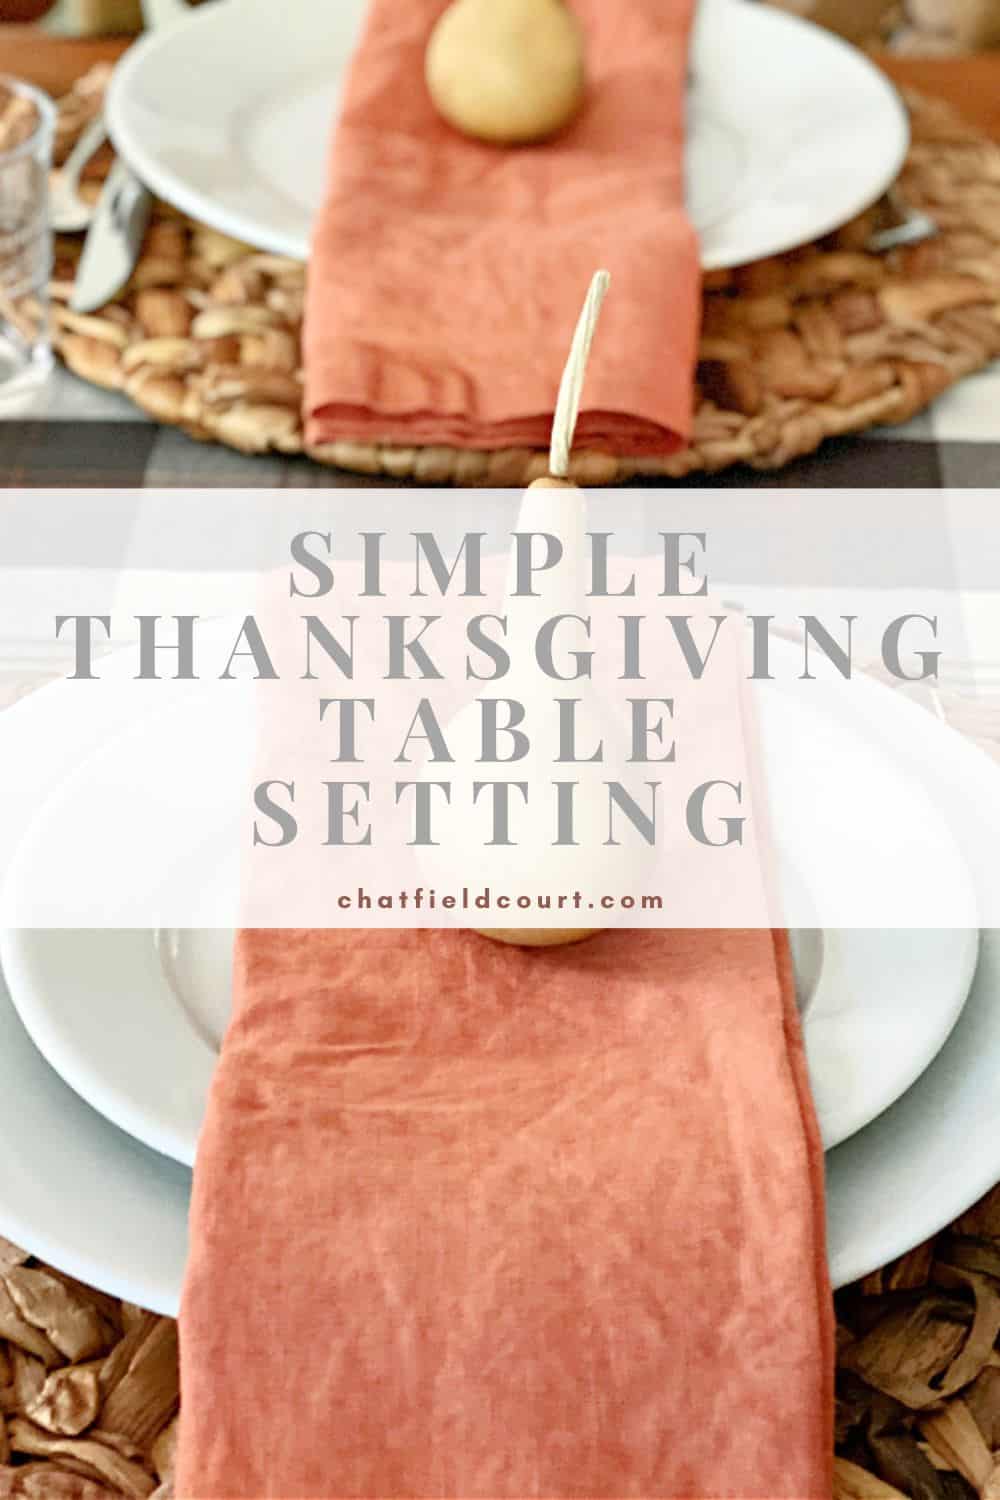 Thanksgiving table setting with a napkin and dried gourd plus a large graphic